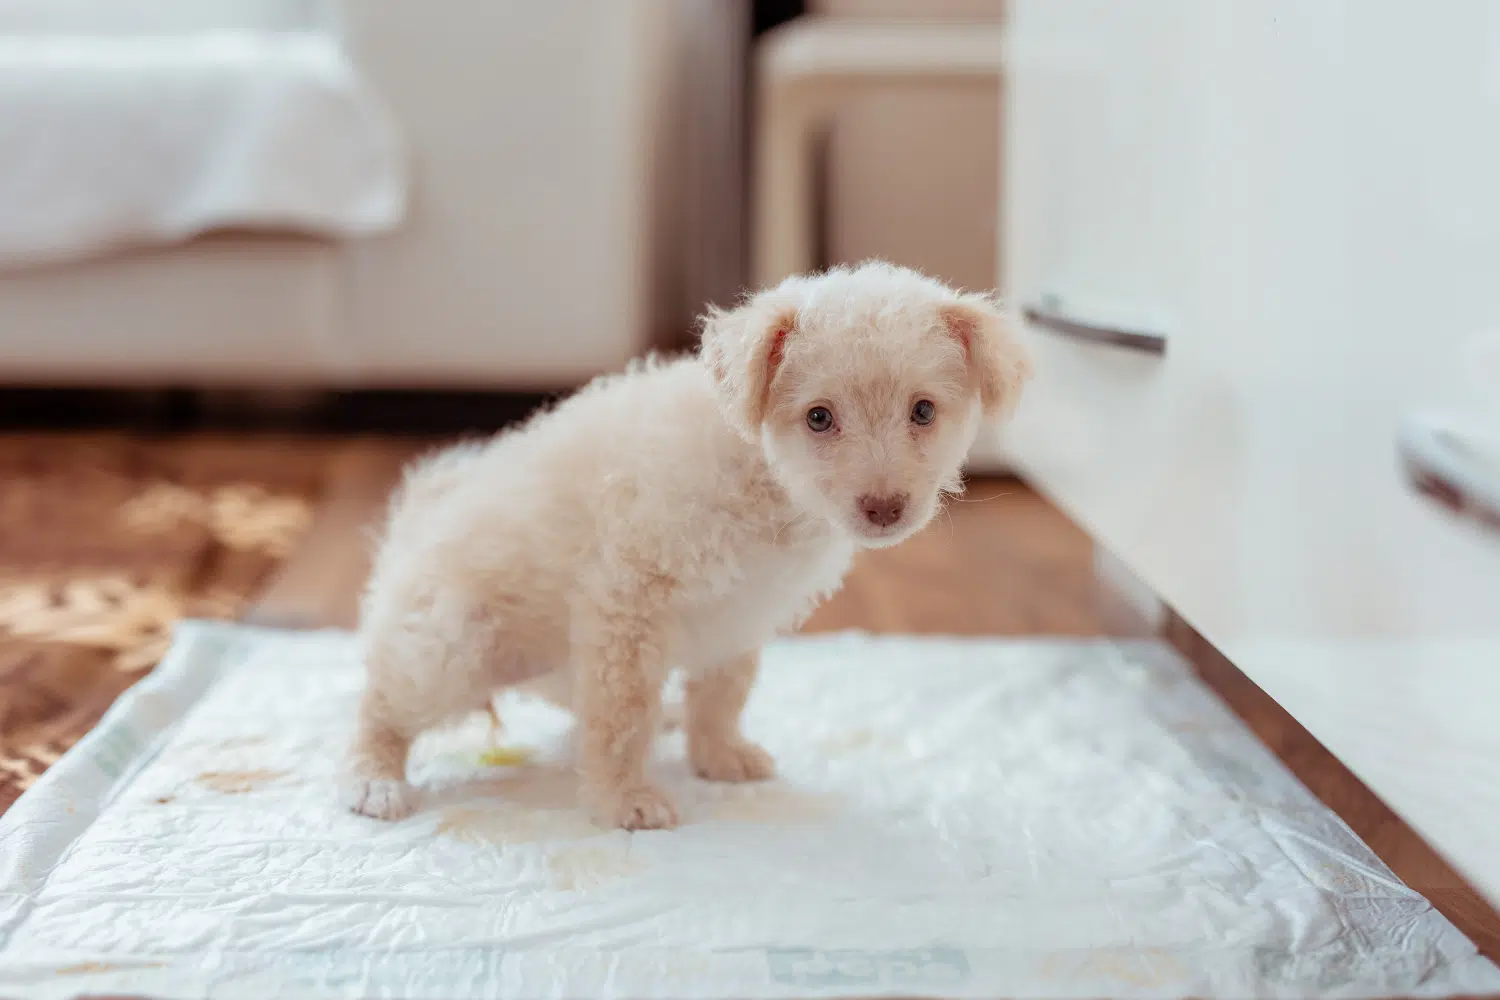 Puppy peeing on a potty pad